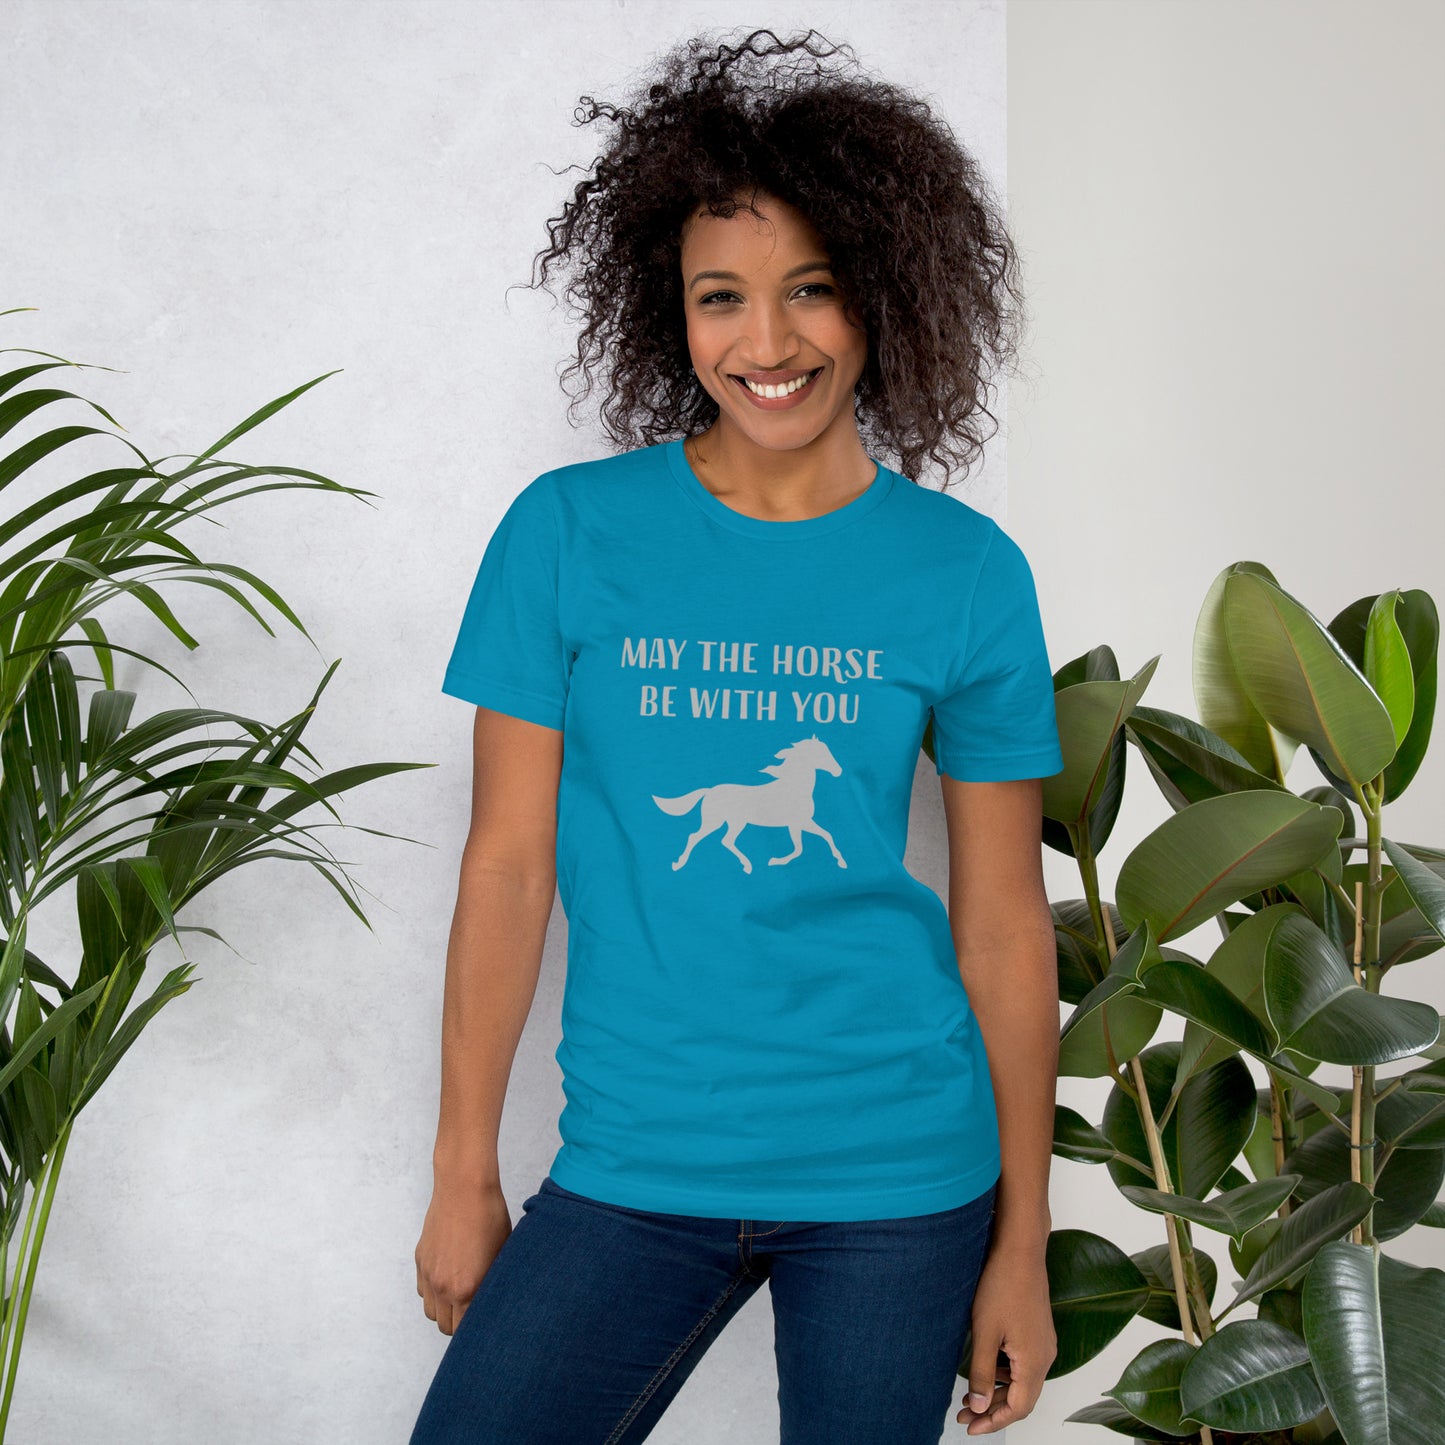 May the Horse be with You  - Unisex t-shirt